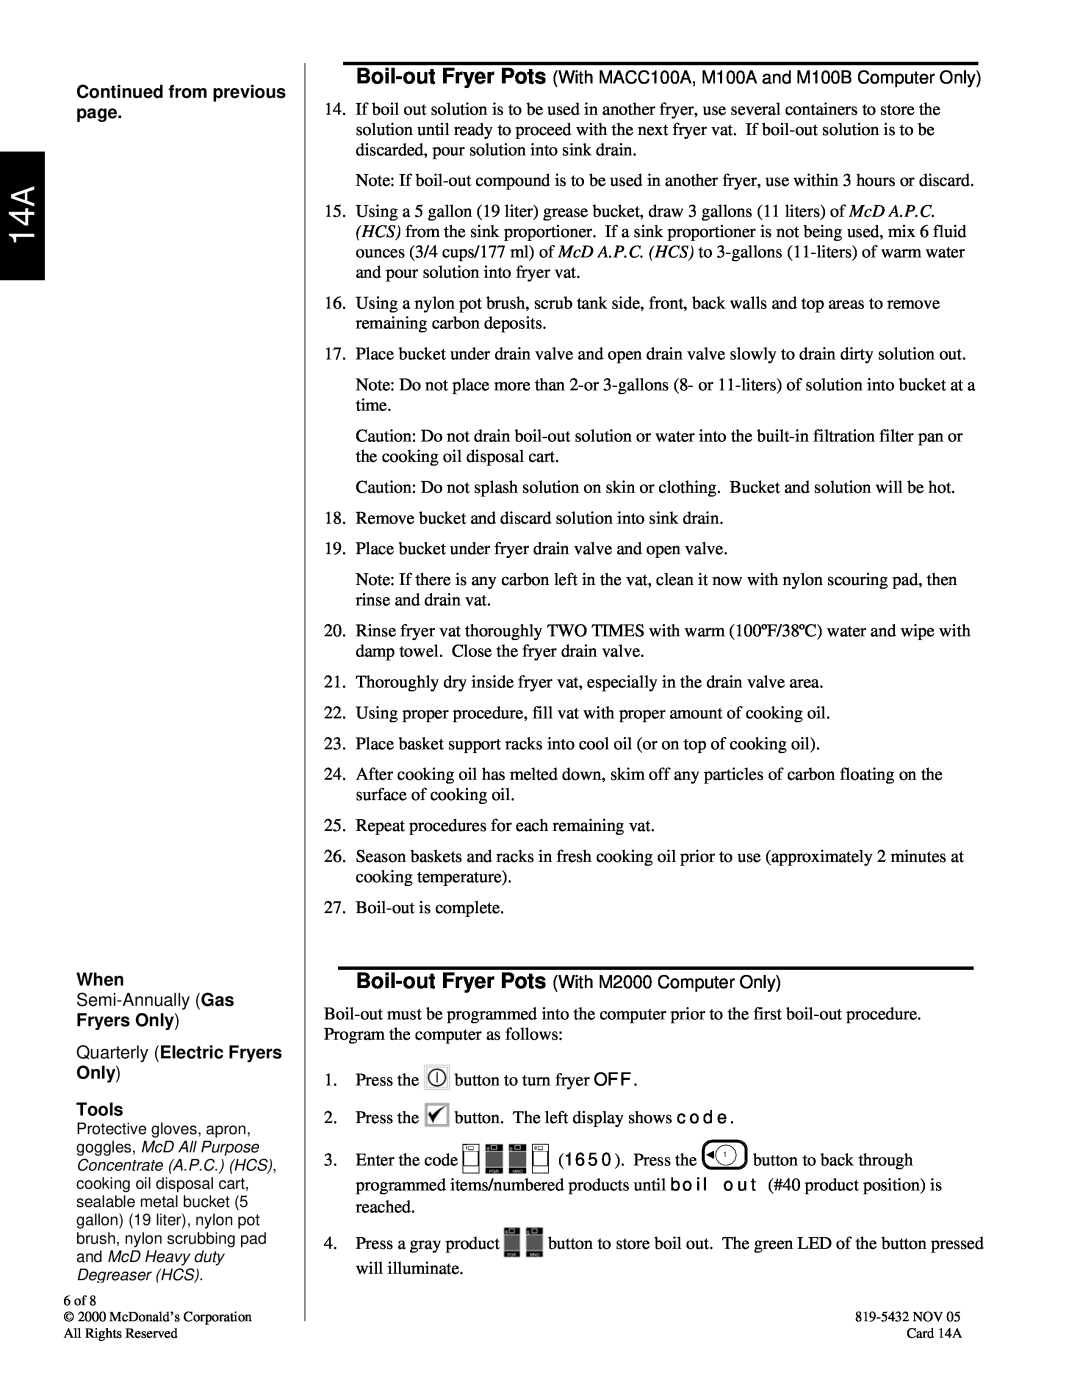 Frymaster 819-5432 manual Continued from previous page, When, Fryers Only Quarterly Electric Fryers Only Tools, 6 of 